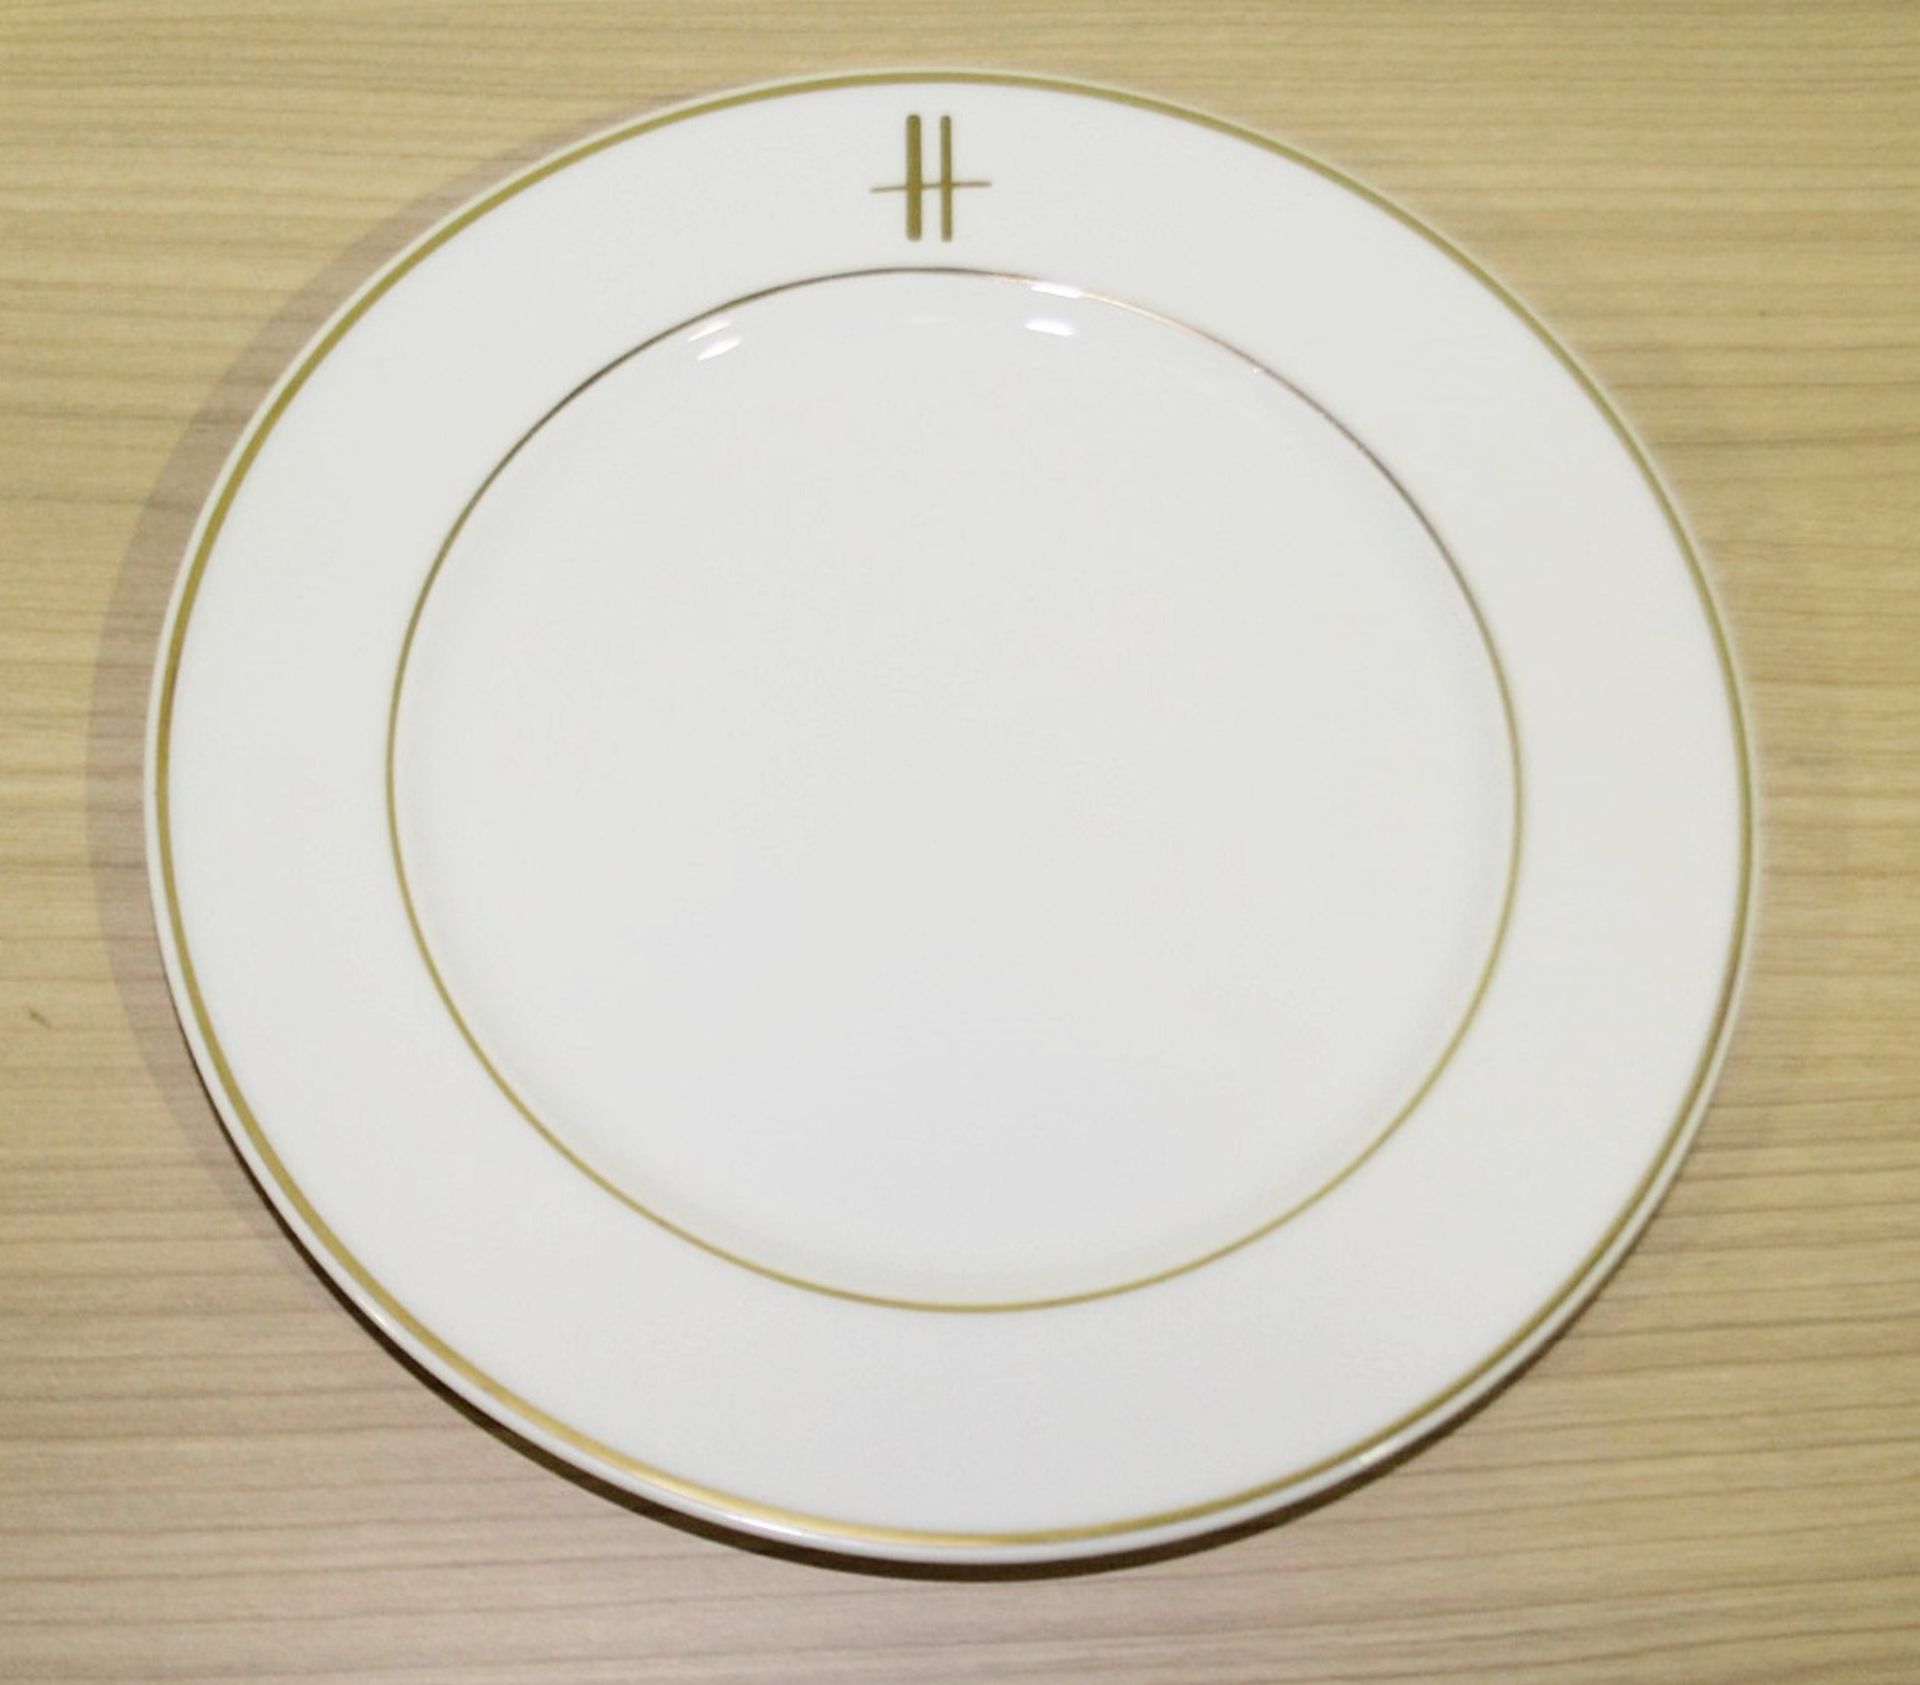 50 x PILLIVUYT Porcelain Side / Starter Plates In White Featuring 'Famous Branding' In Gold - Image 2 of 5